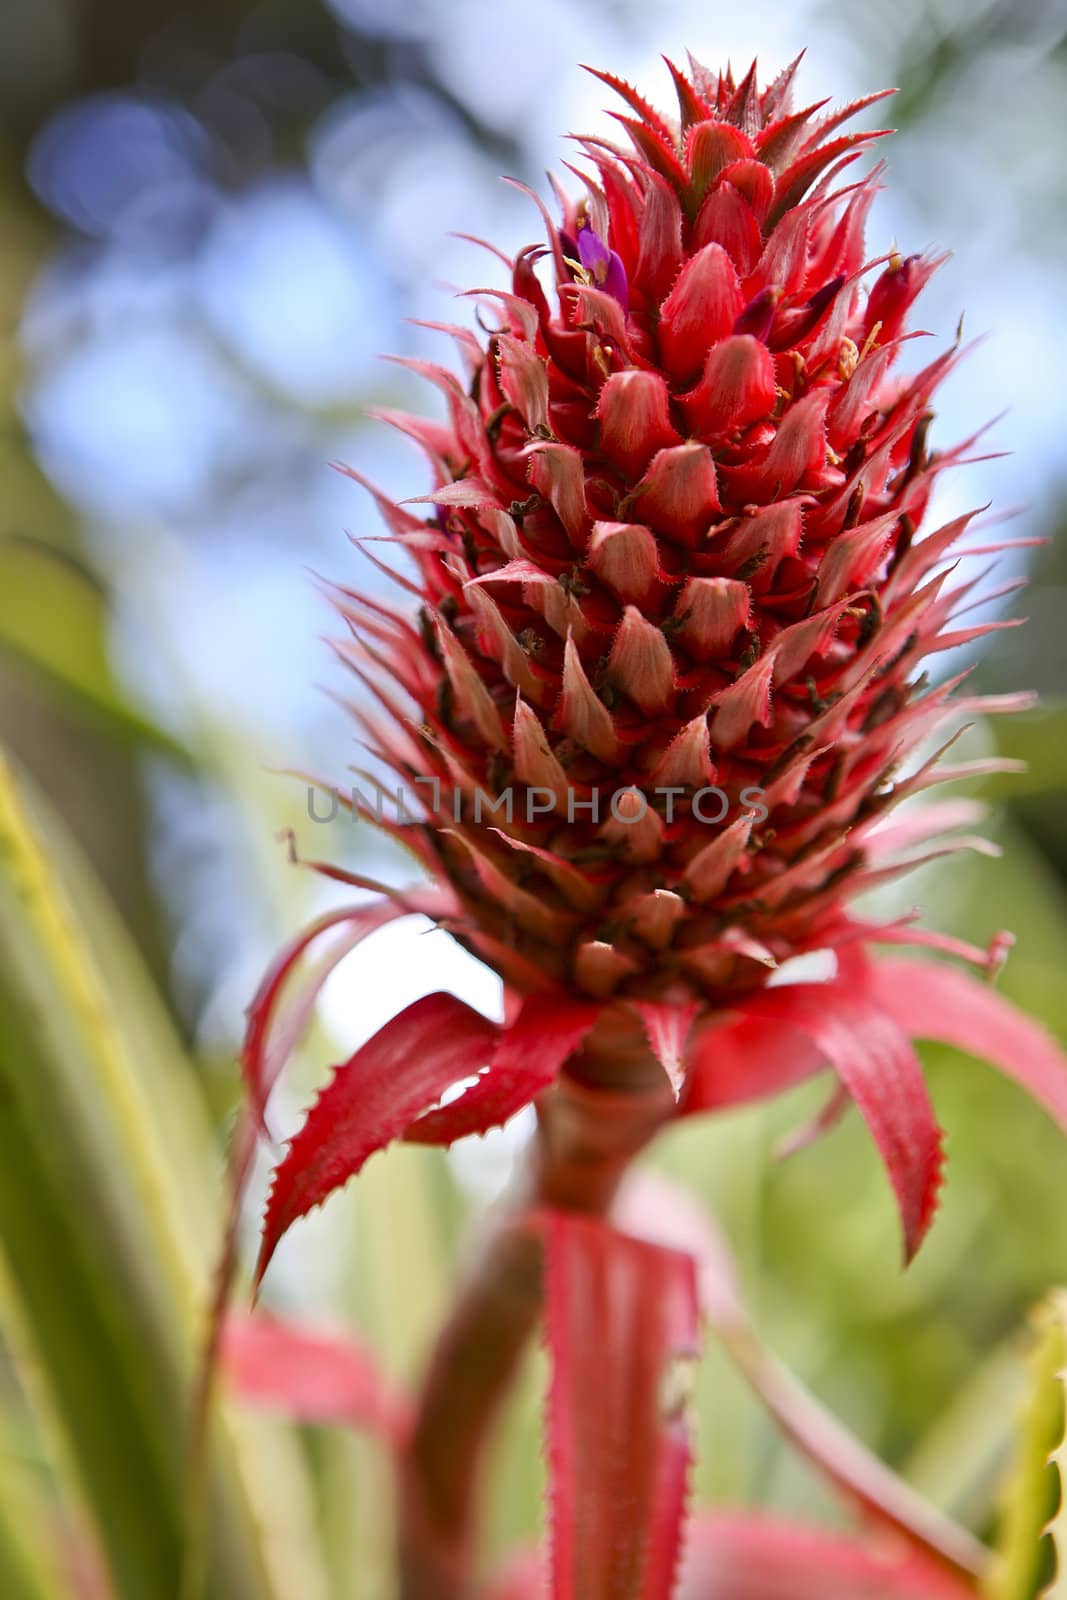 Red Pineapple plant found on the Island of Oahu Hawaii.  